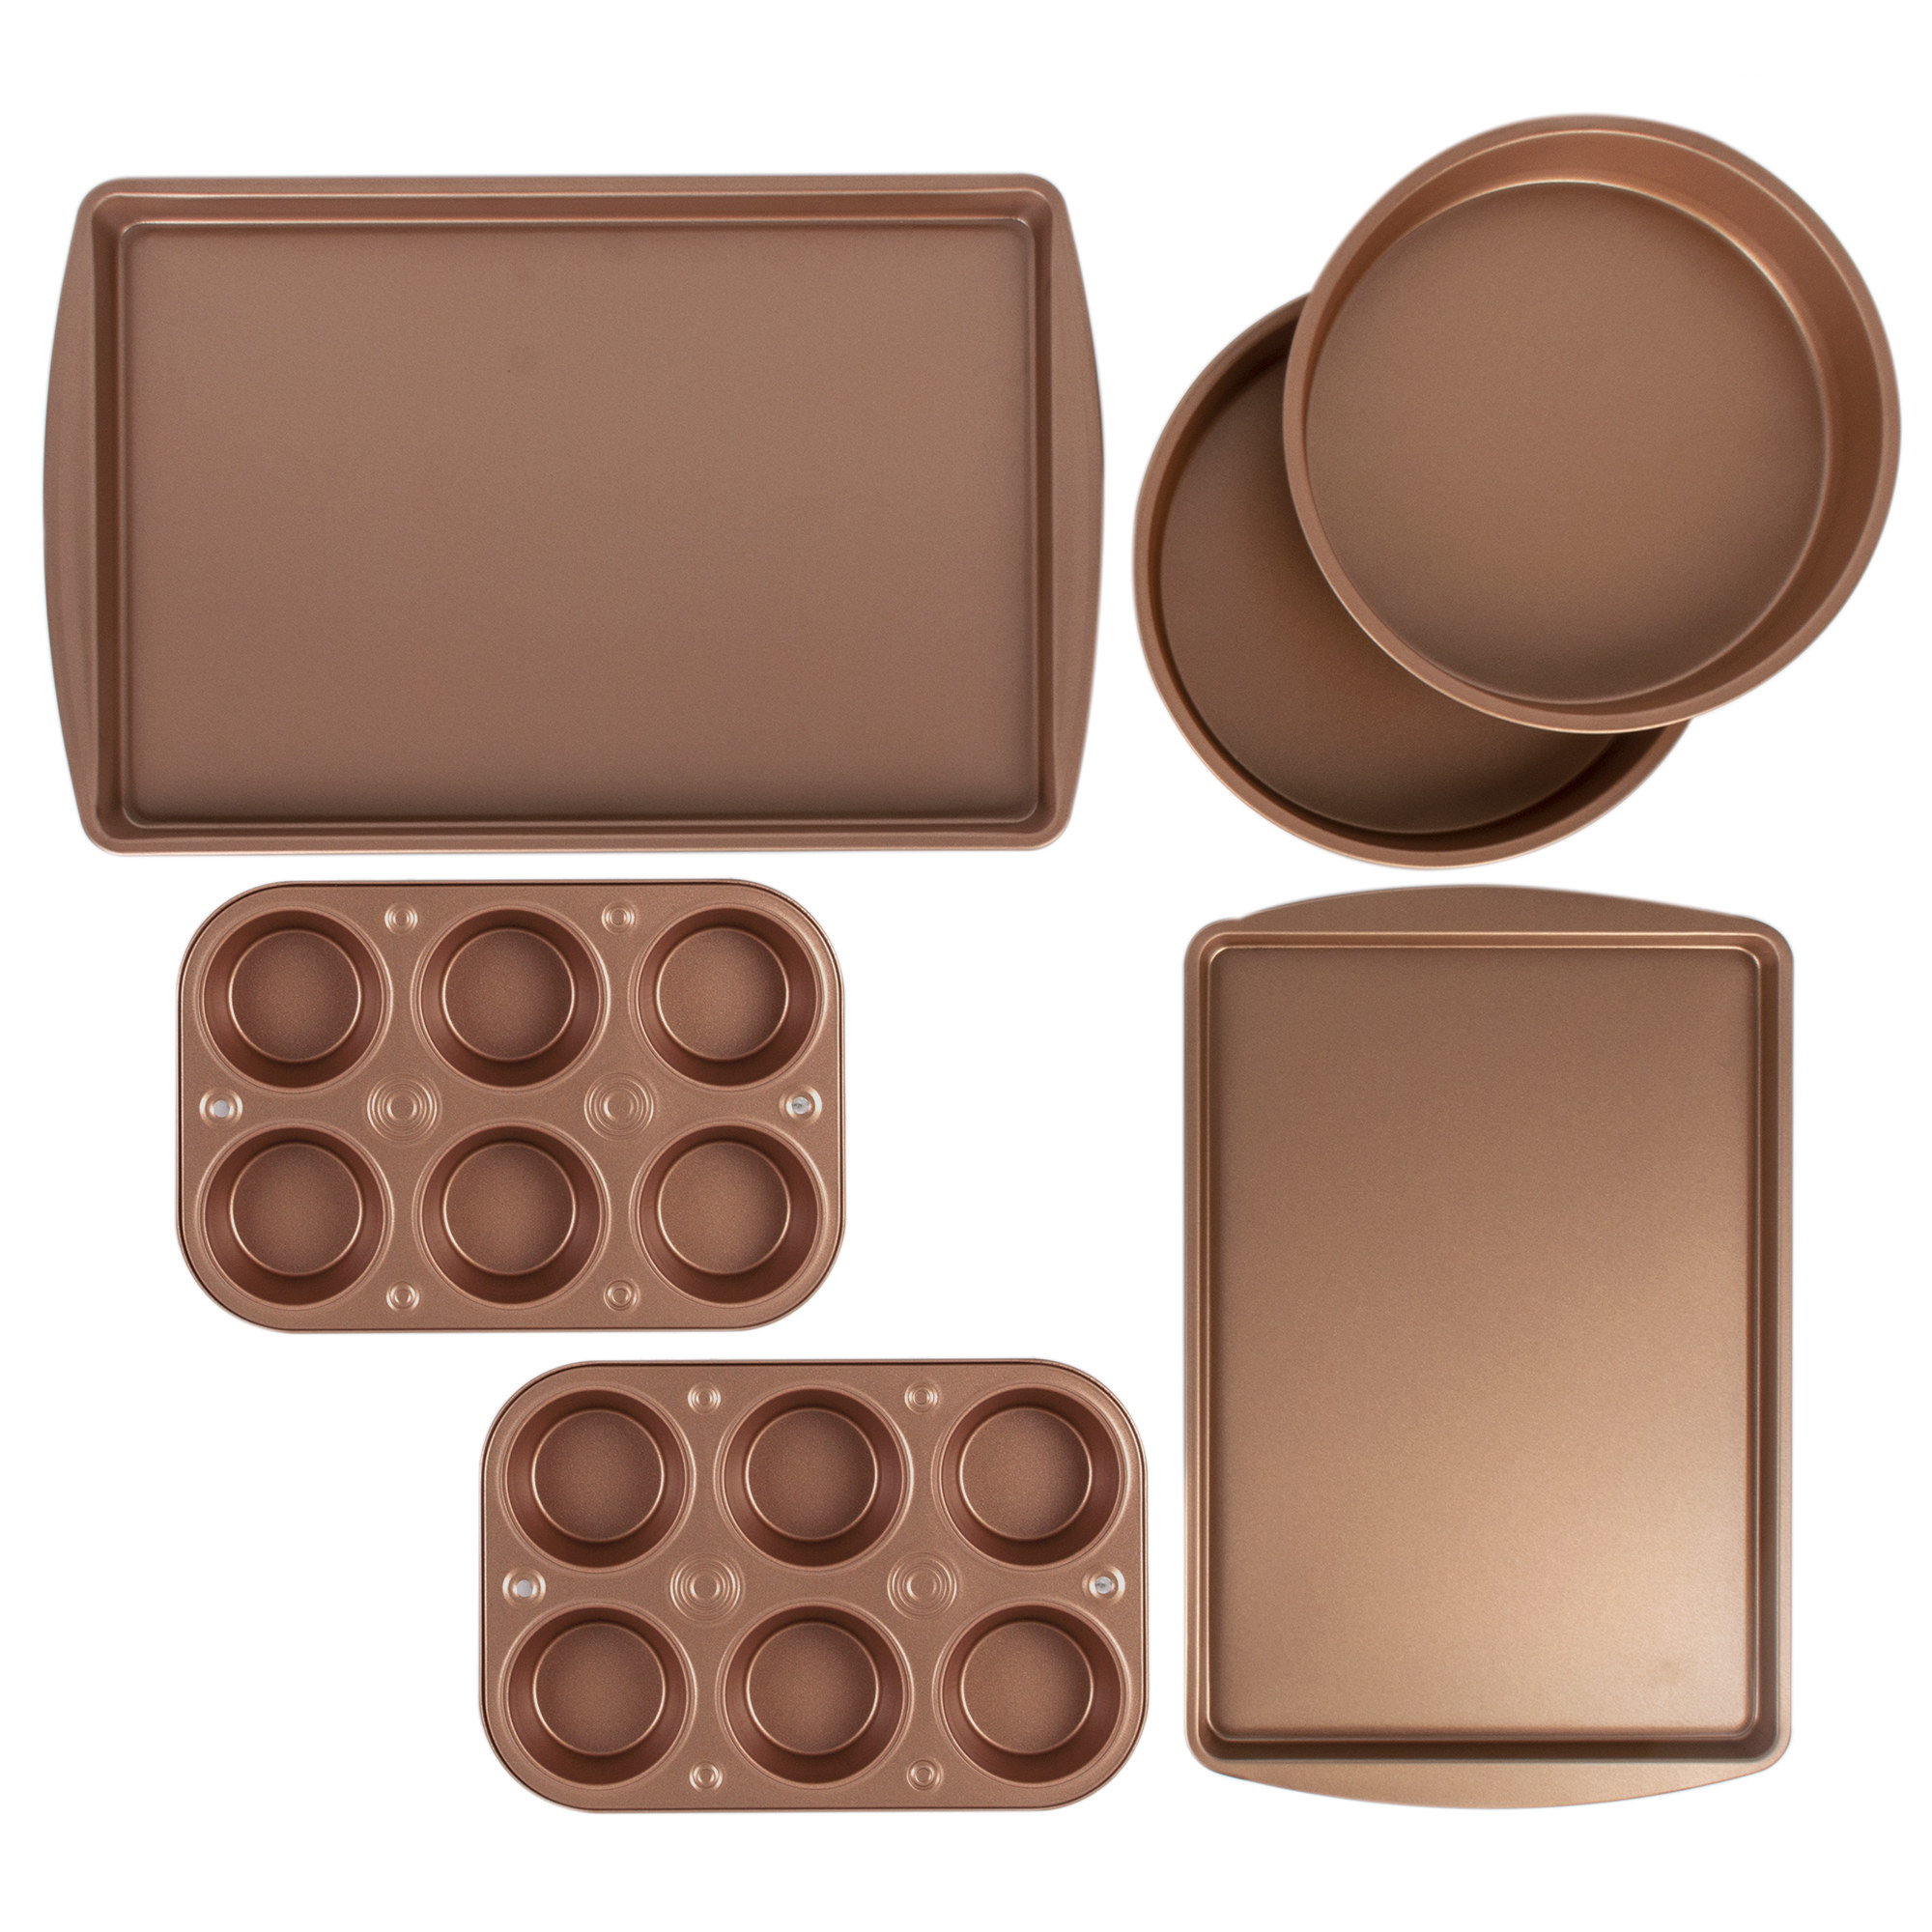 The copper bakeware